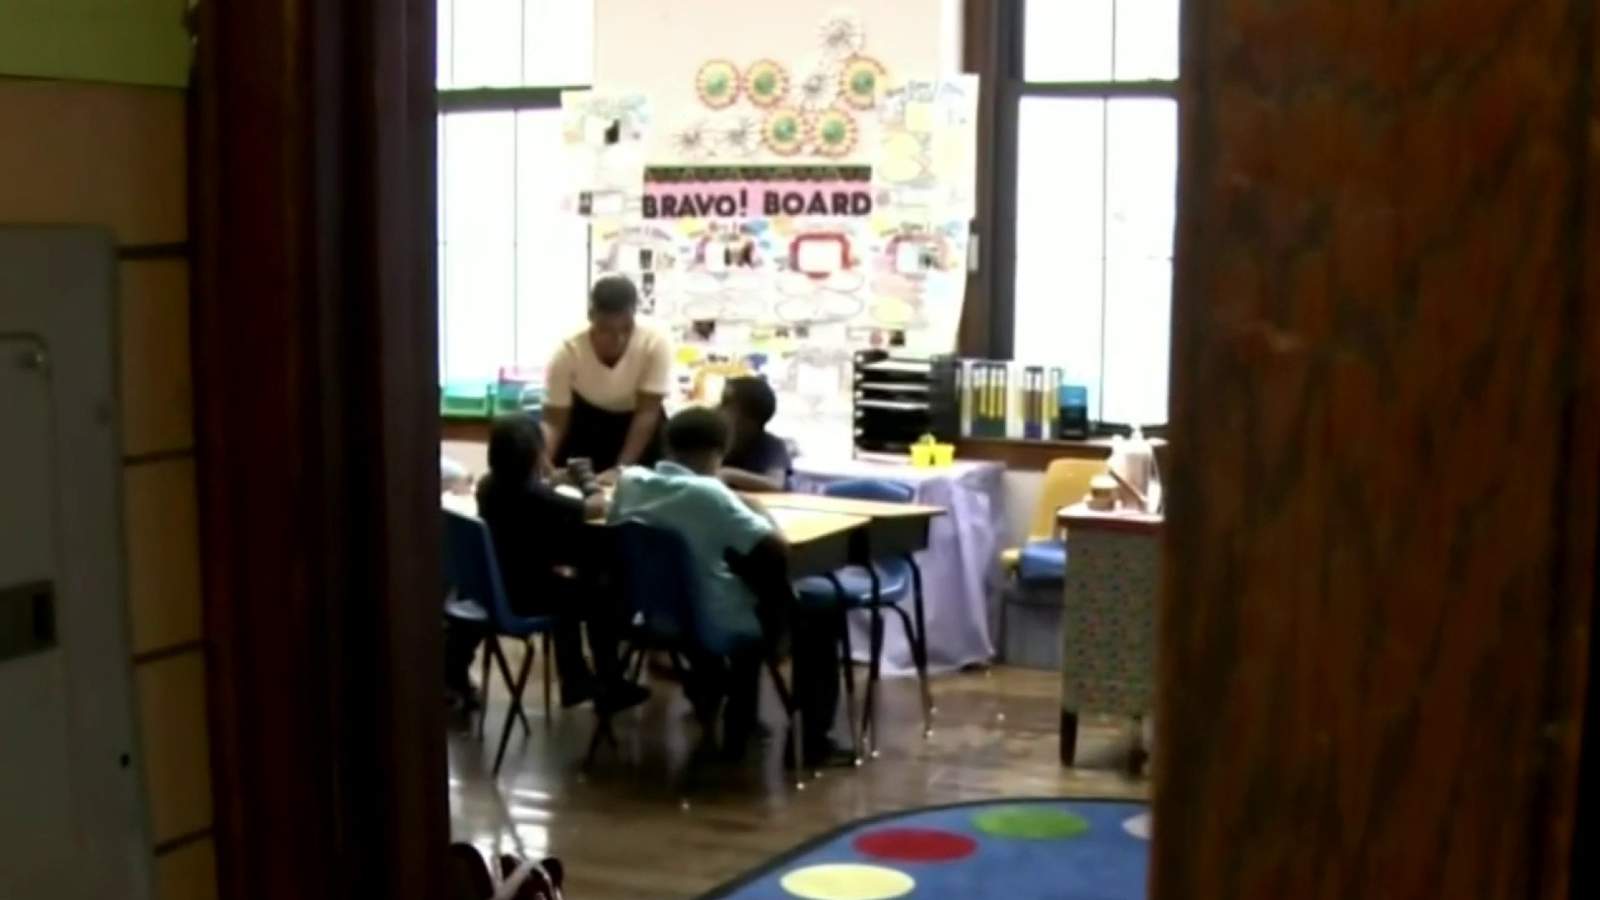 Michigan schools facing likely substitute teacher shortage when they reopen